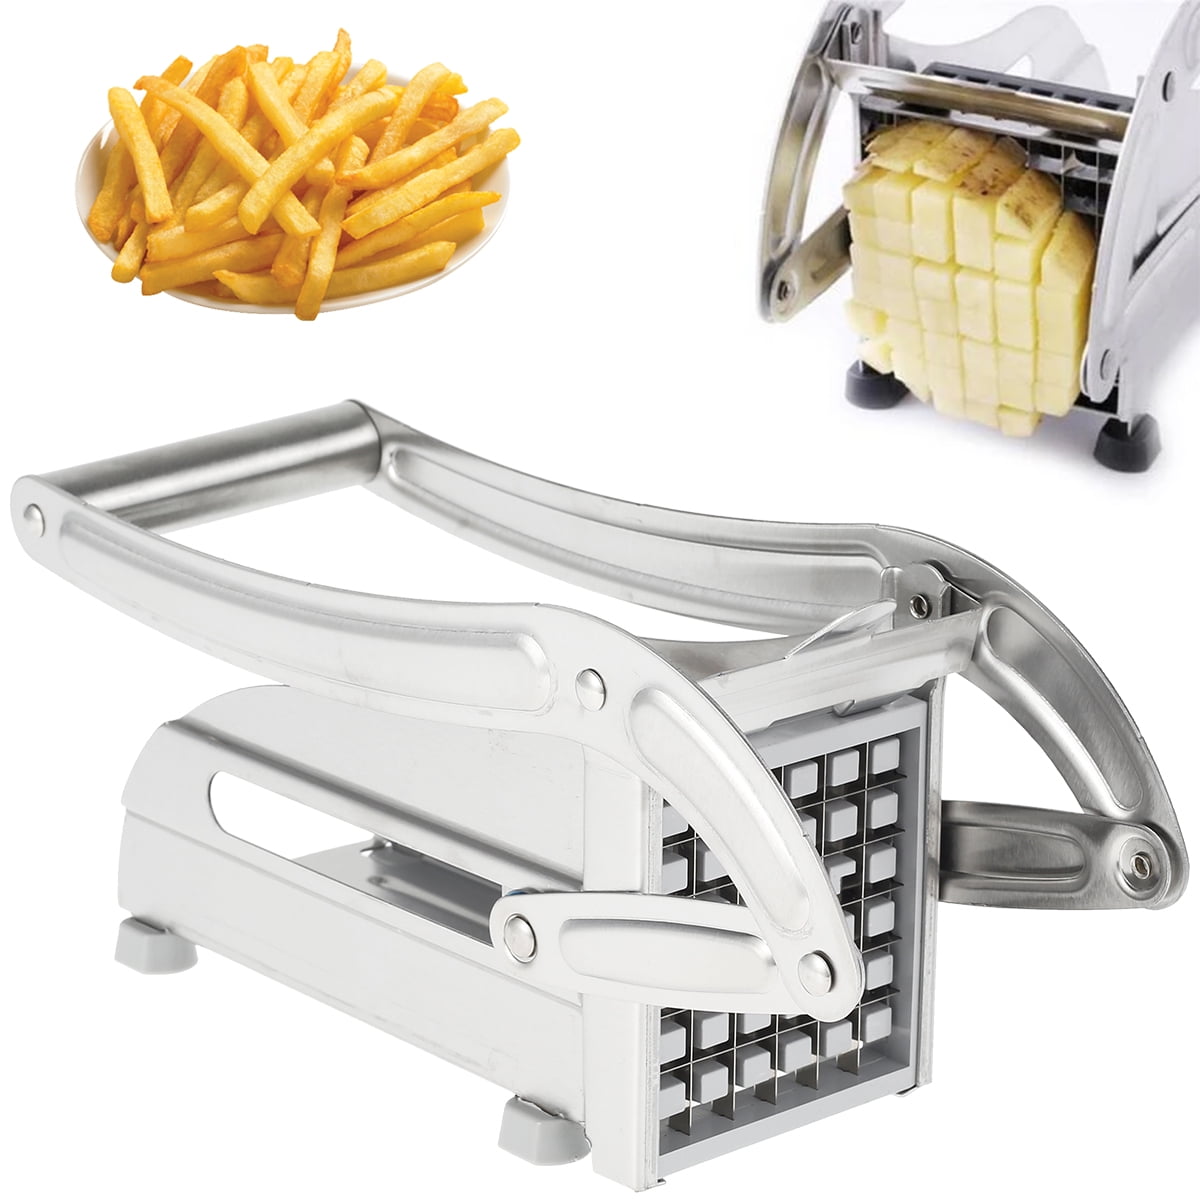 Vegetables Fruits Slicer Potato Chipper French Fries Slicing Stainless Steel Kitchen Tool Tool Gadgets for Kitchen 